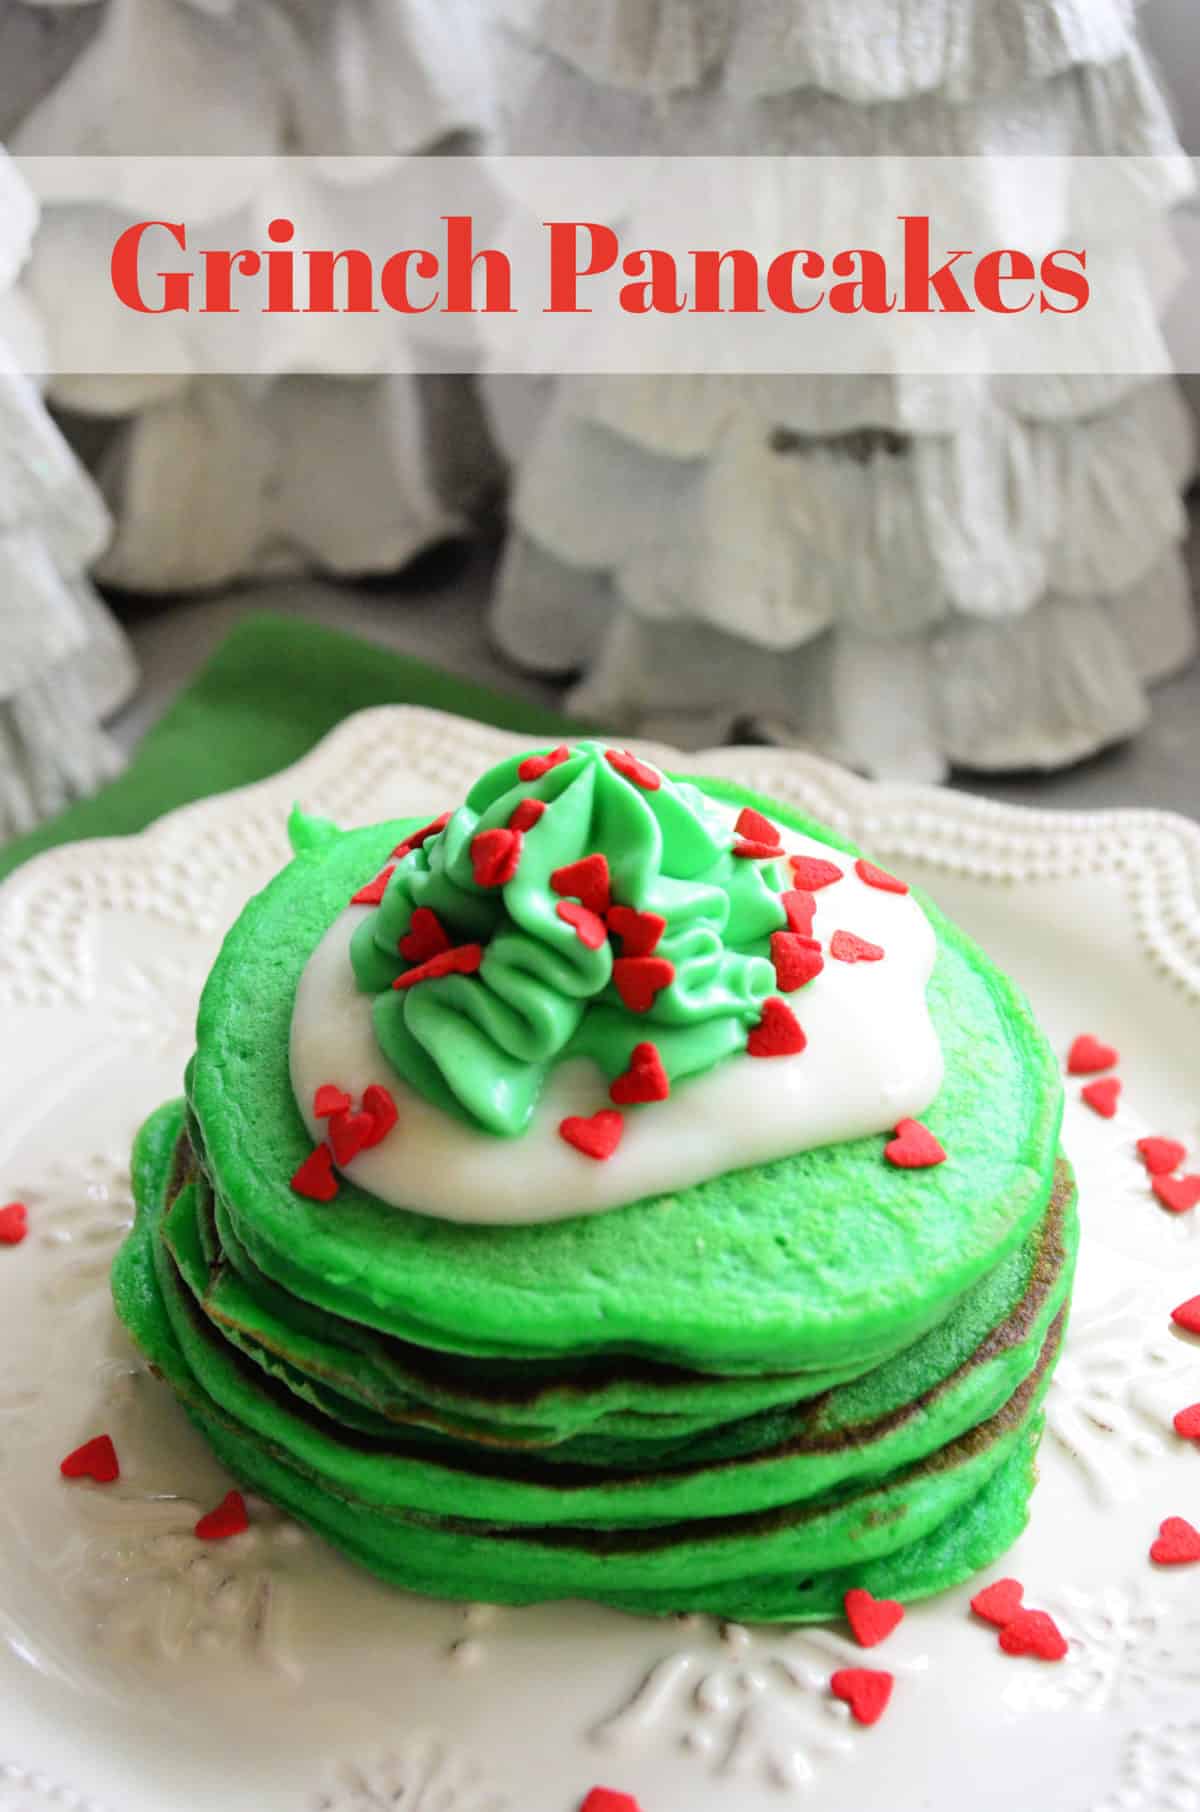 https://www.katiescucina.com/wp-content/uploads/2019/12/Grinch-Pancakes-scaled.jpg